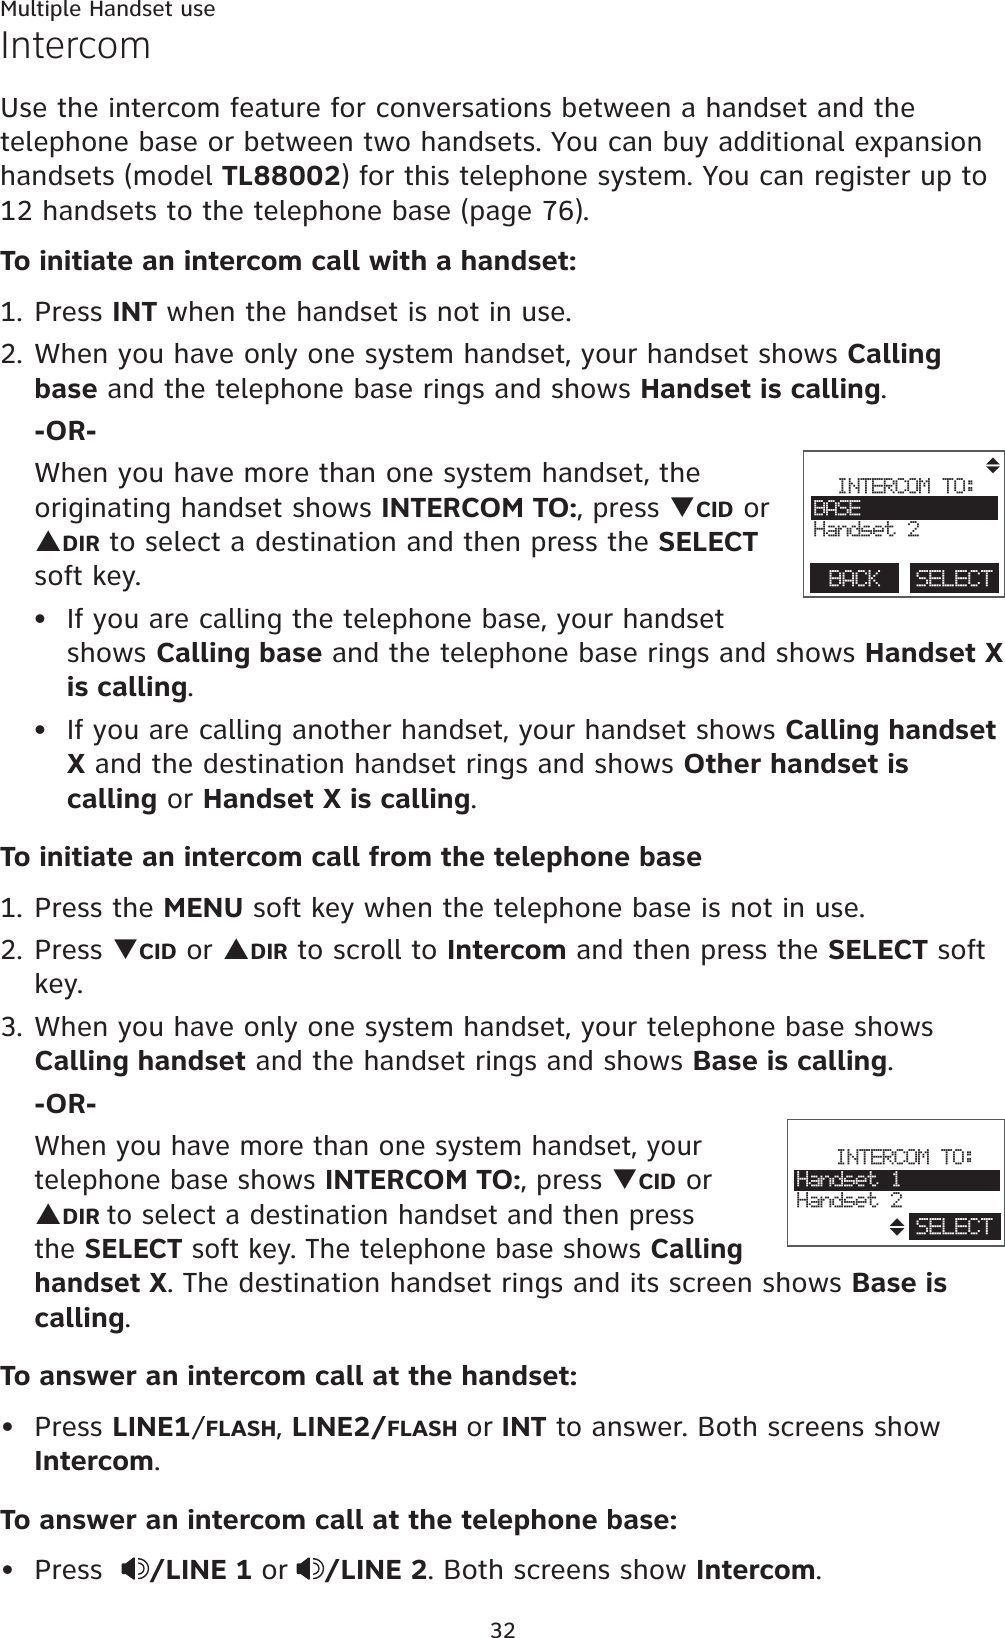 Multiple Handset use32IntercomUse the intercom feature for conversations between a handset and the telephone base or between two handsets. You can buy additional expansion handsets (model TL88002) for this telephone system. You can register up to 12 handsets to the telephone base (page 76).To initiate an intercom call with a handset:1. Press INT when the handset is not in use.2. When you have only one system handset, your handset shows Callingbase and the telephone base rings and shows Handset is calling.-OR-When you have more than one system handset, the originating handset shows INTERCOM TO:, press TCID or SDIR to select a destination and then press the SELECTsoft key.If you are calling the telephone base, your handset shows Calling base and the telephone base rings and shows Handset X is calling.If you are calling another handset, your handset shows Calling handset X and the destination handset rings and shows Other handset is calling or Handset X is calling.To initiate an intercom call from the telephone base1. Press the MENU soft key when the telephone base is not in use.2. Press TCID or SDIR to scroll to Intercom and then press the SELECT soft key.3. When you have only one system handset, your telephone base shows Calling handset and the handset rings and shows Base is calling.-OR-When you have more than one system handset, your telephone base shows INTERCOM TO:, press TCID or SDIRto select a destination handset and then press the SELECT soft key. The telephone base shows Callinghandset X. The destination handset rings and its screen shows Base is calling.To answer an intercom call at the handset:Press LINE1/FLASH,LINE2/FLASH or INT to answer. Both screens show Intercom.To answer an intercom call at the telephone base:Press   /LINE 1 or /LINE 2. Both screens show Intercom.••••INTERCOM TO:BASEHandset 2BACK    SELECT                        INTERCOM TO:Handset 1Handset 2SELECT